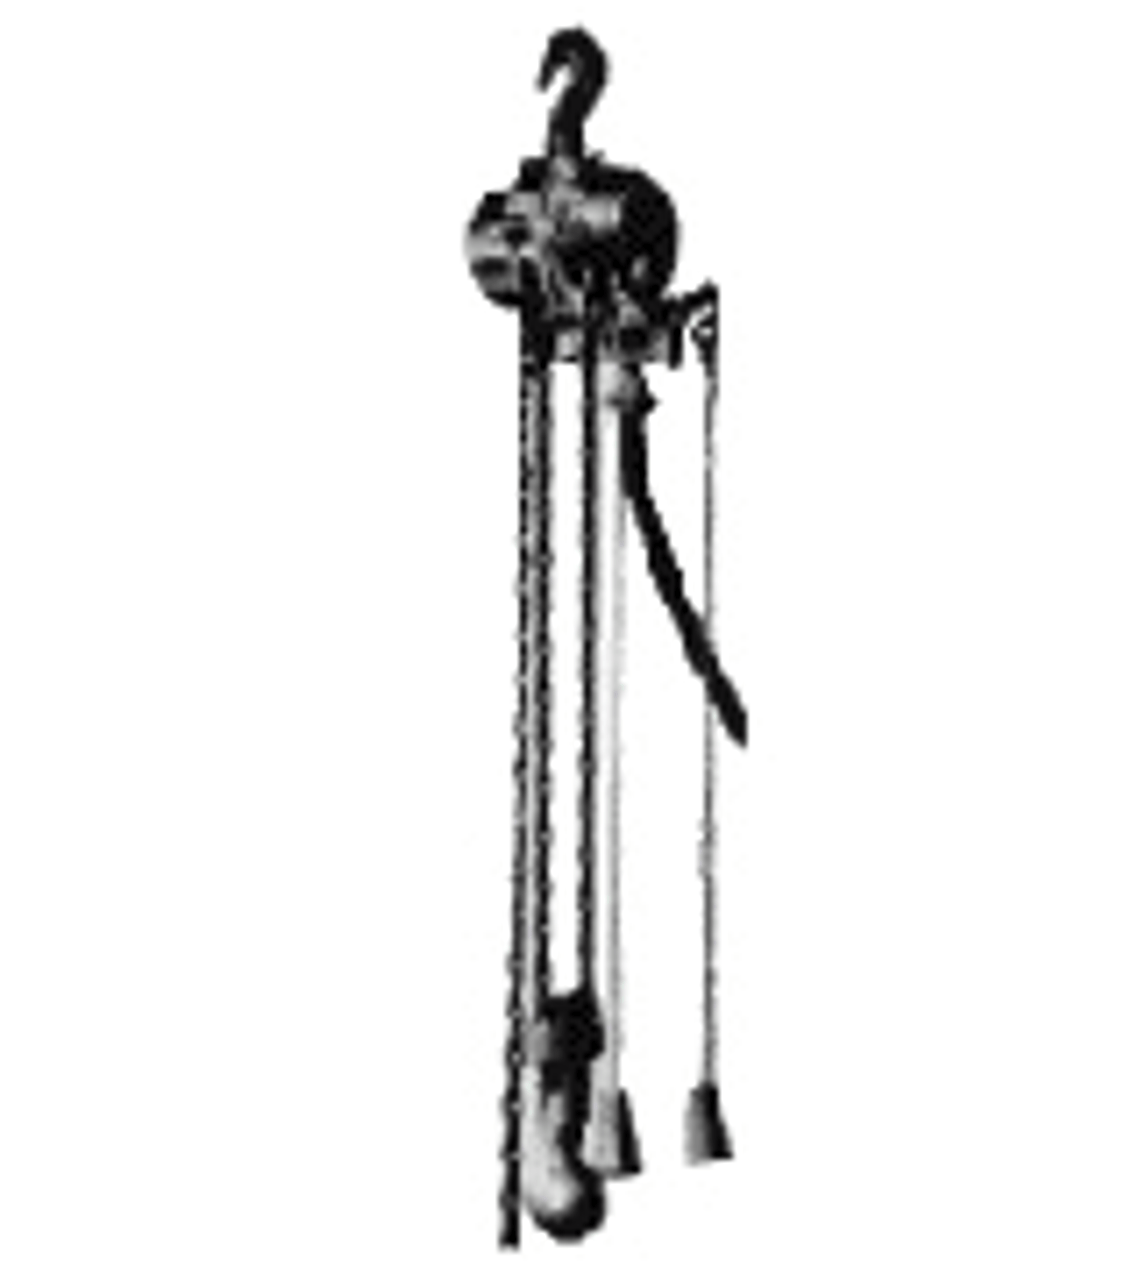 IMPA 591354 Chain hoist pneumatic - 1 ton - 6,0 mtr./min with full load TCR1000C with 3 mtr. chain (lift)-ATEX zone 2 & 22